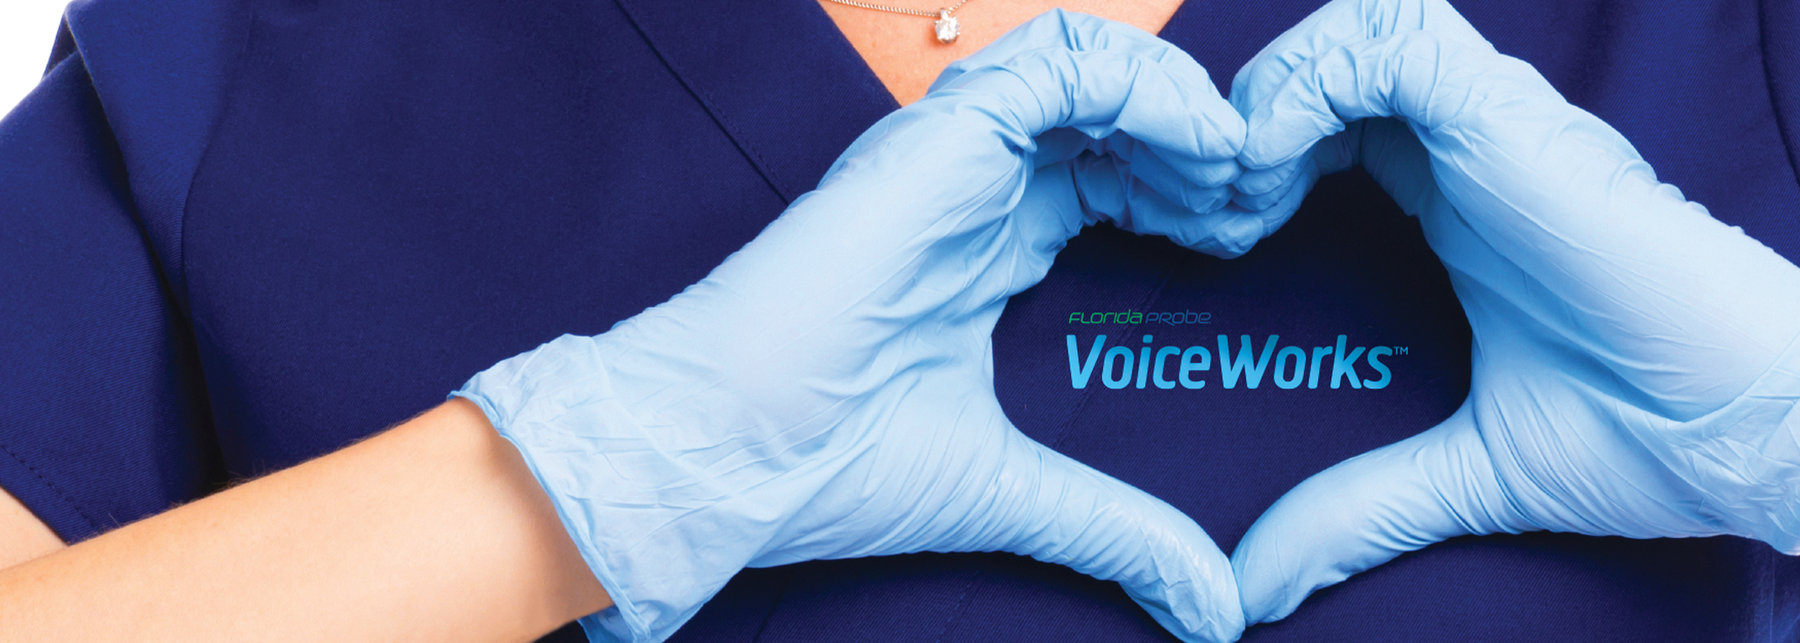 Oral Science Launches VoiceWorks, a Voice-Controlled Perio Charting System to Probe, Chart, Educate & Motivate!